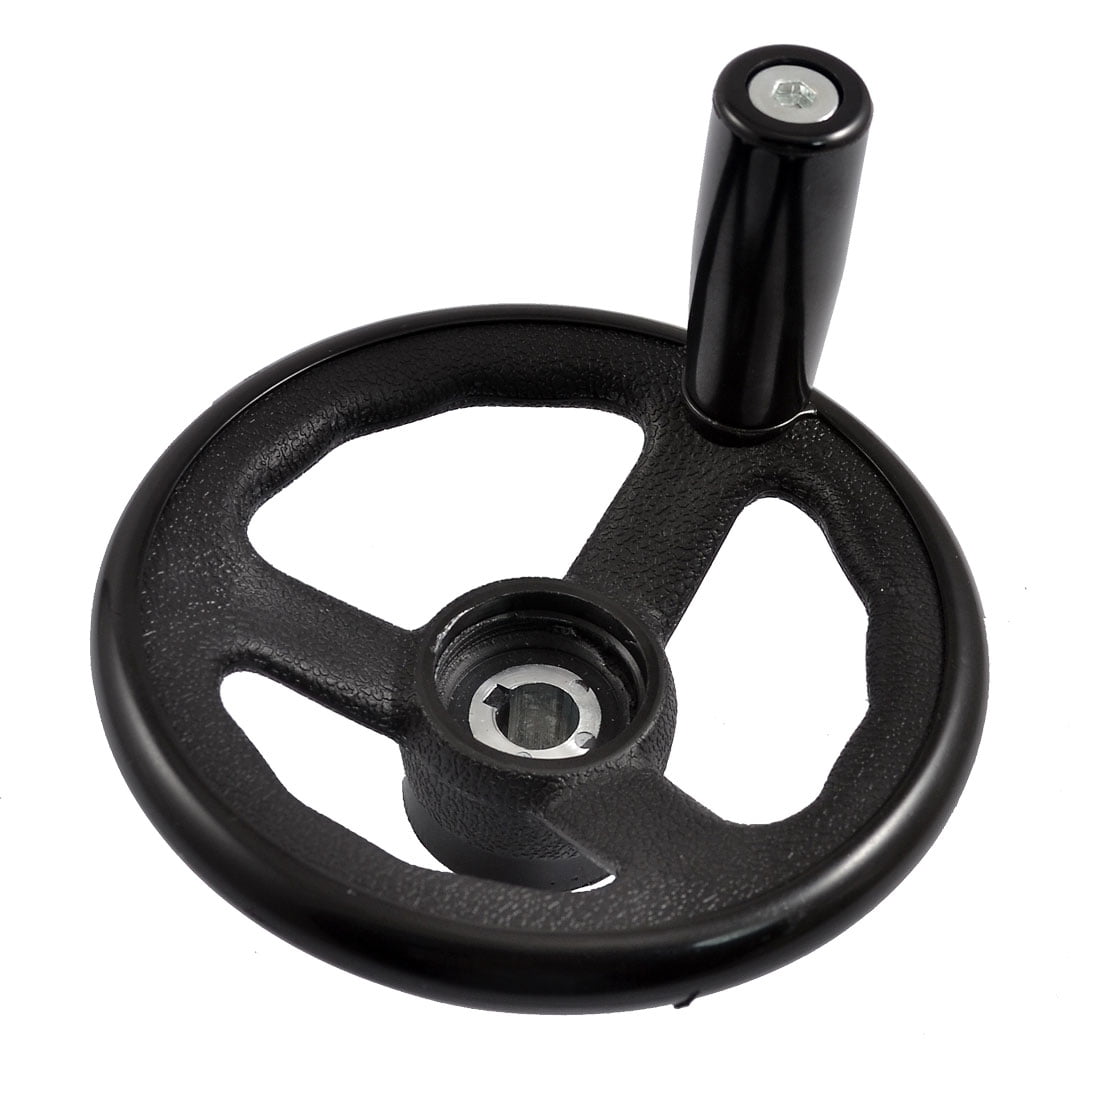 1280mm Lathe Hand Wheel 1 pcs Black Lathe Milling Machine Rear Ripple Hand Wheel with Revolving Handle for Industrial Machine Tools 